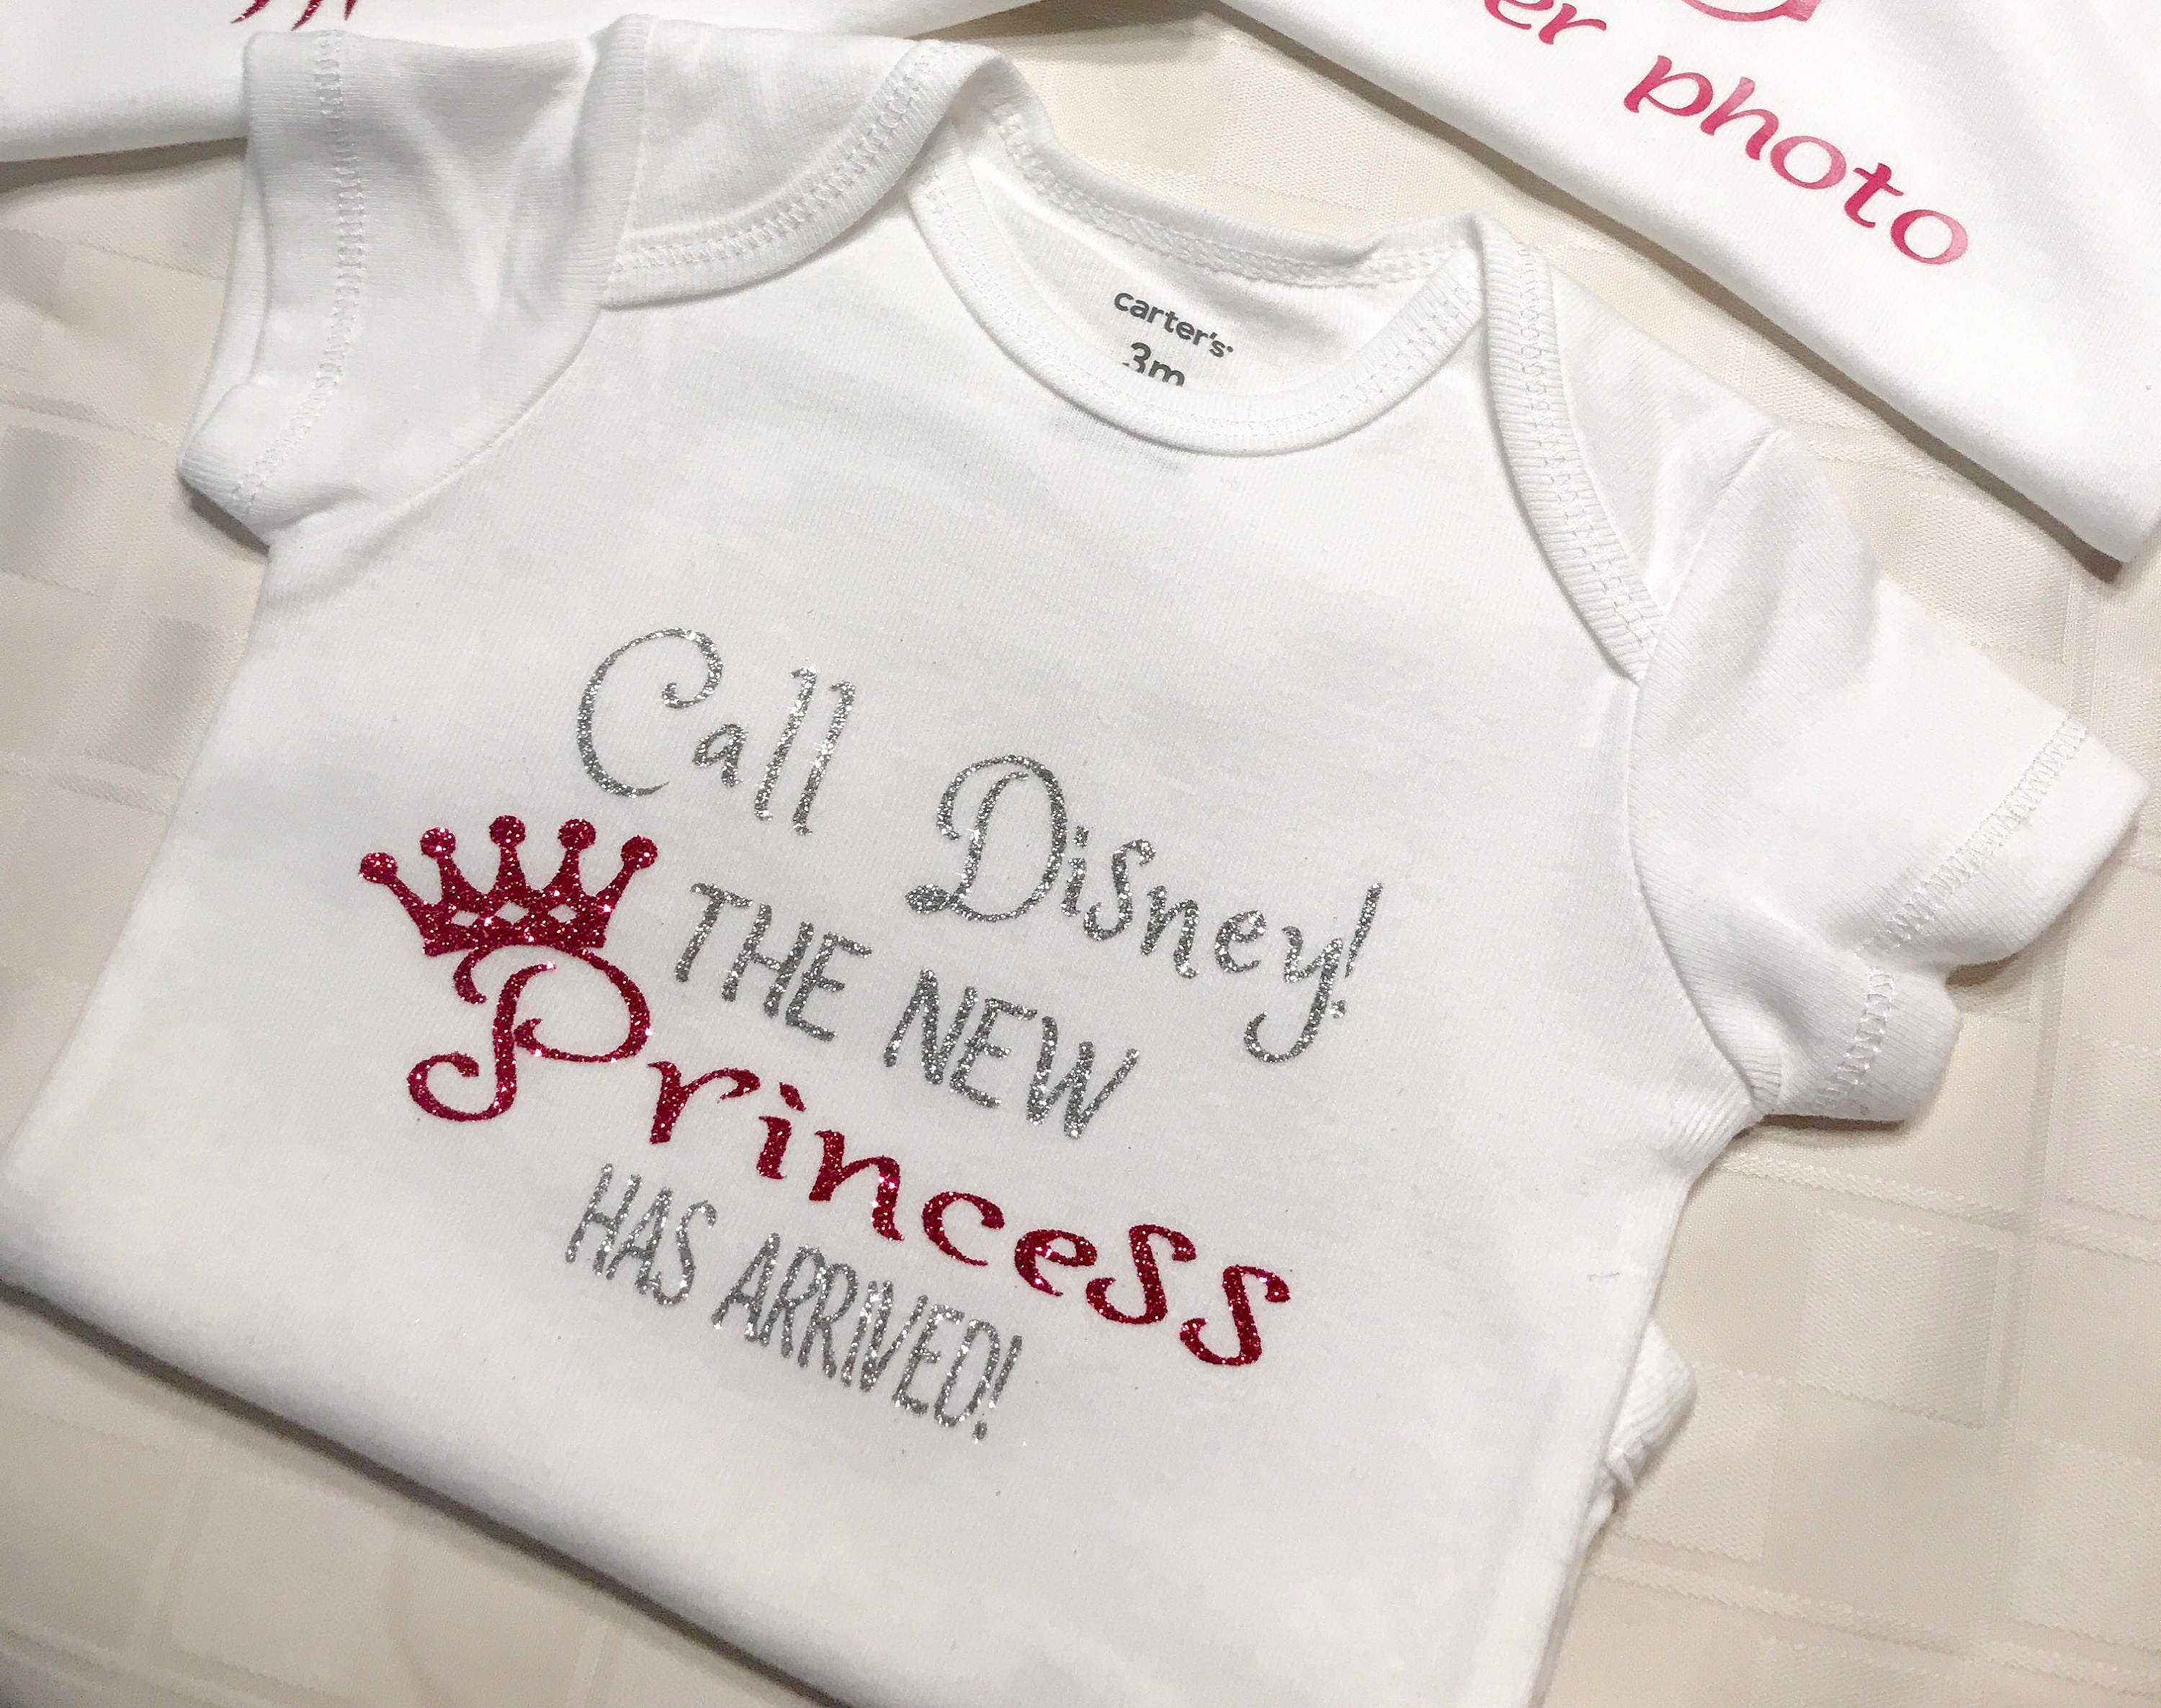 Download Call disney the new princess has arrived onesie